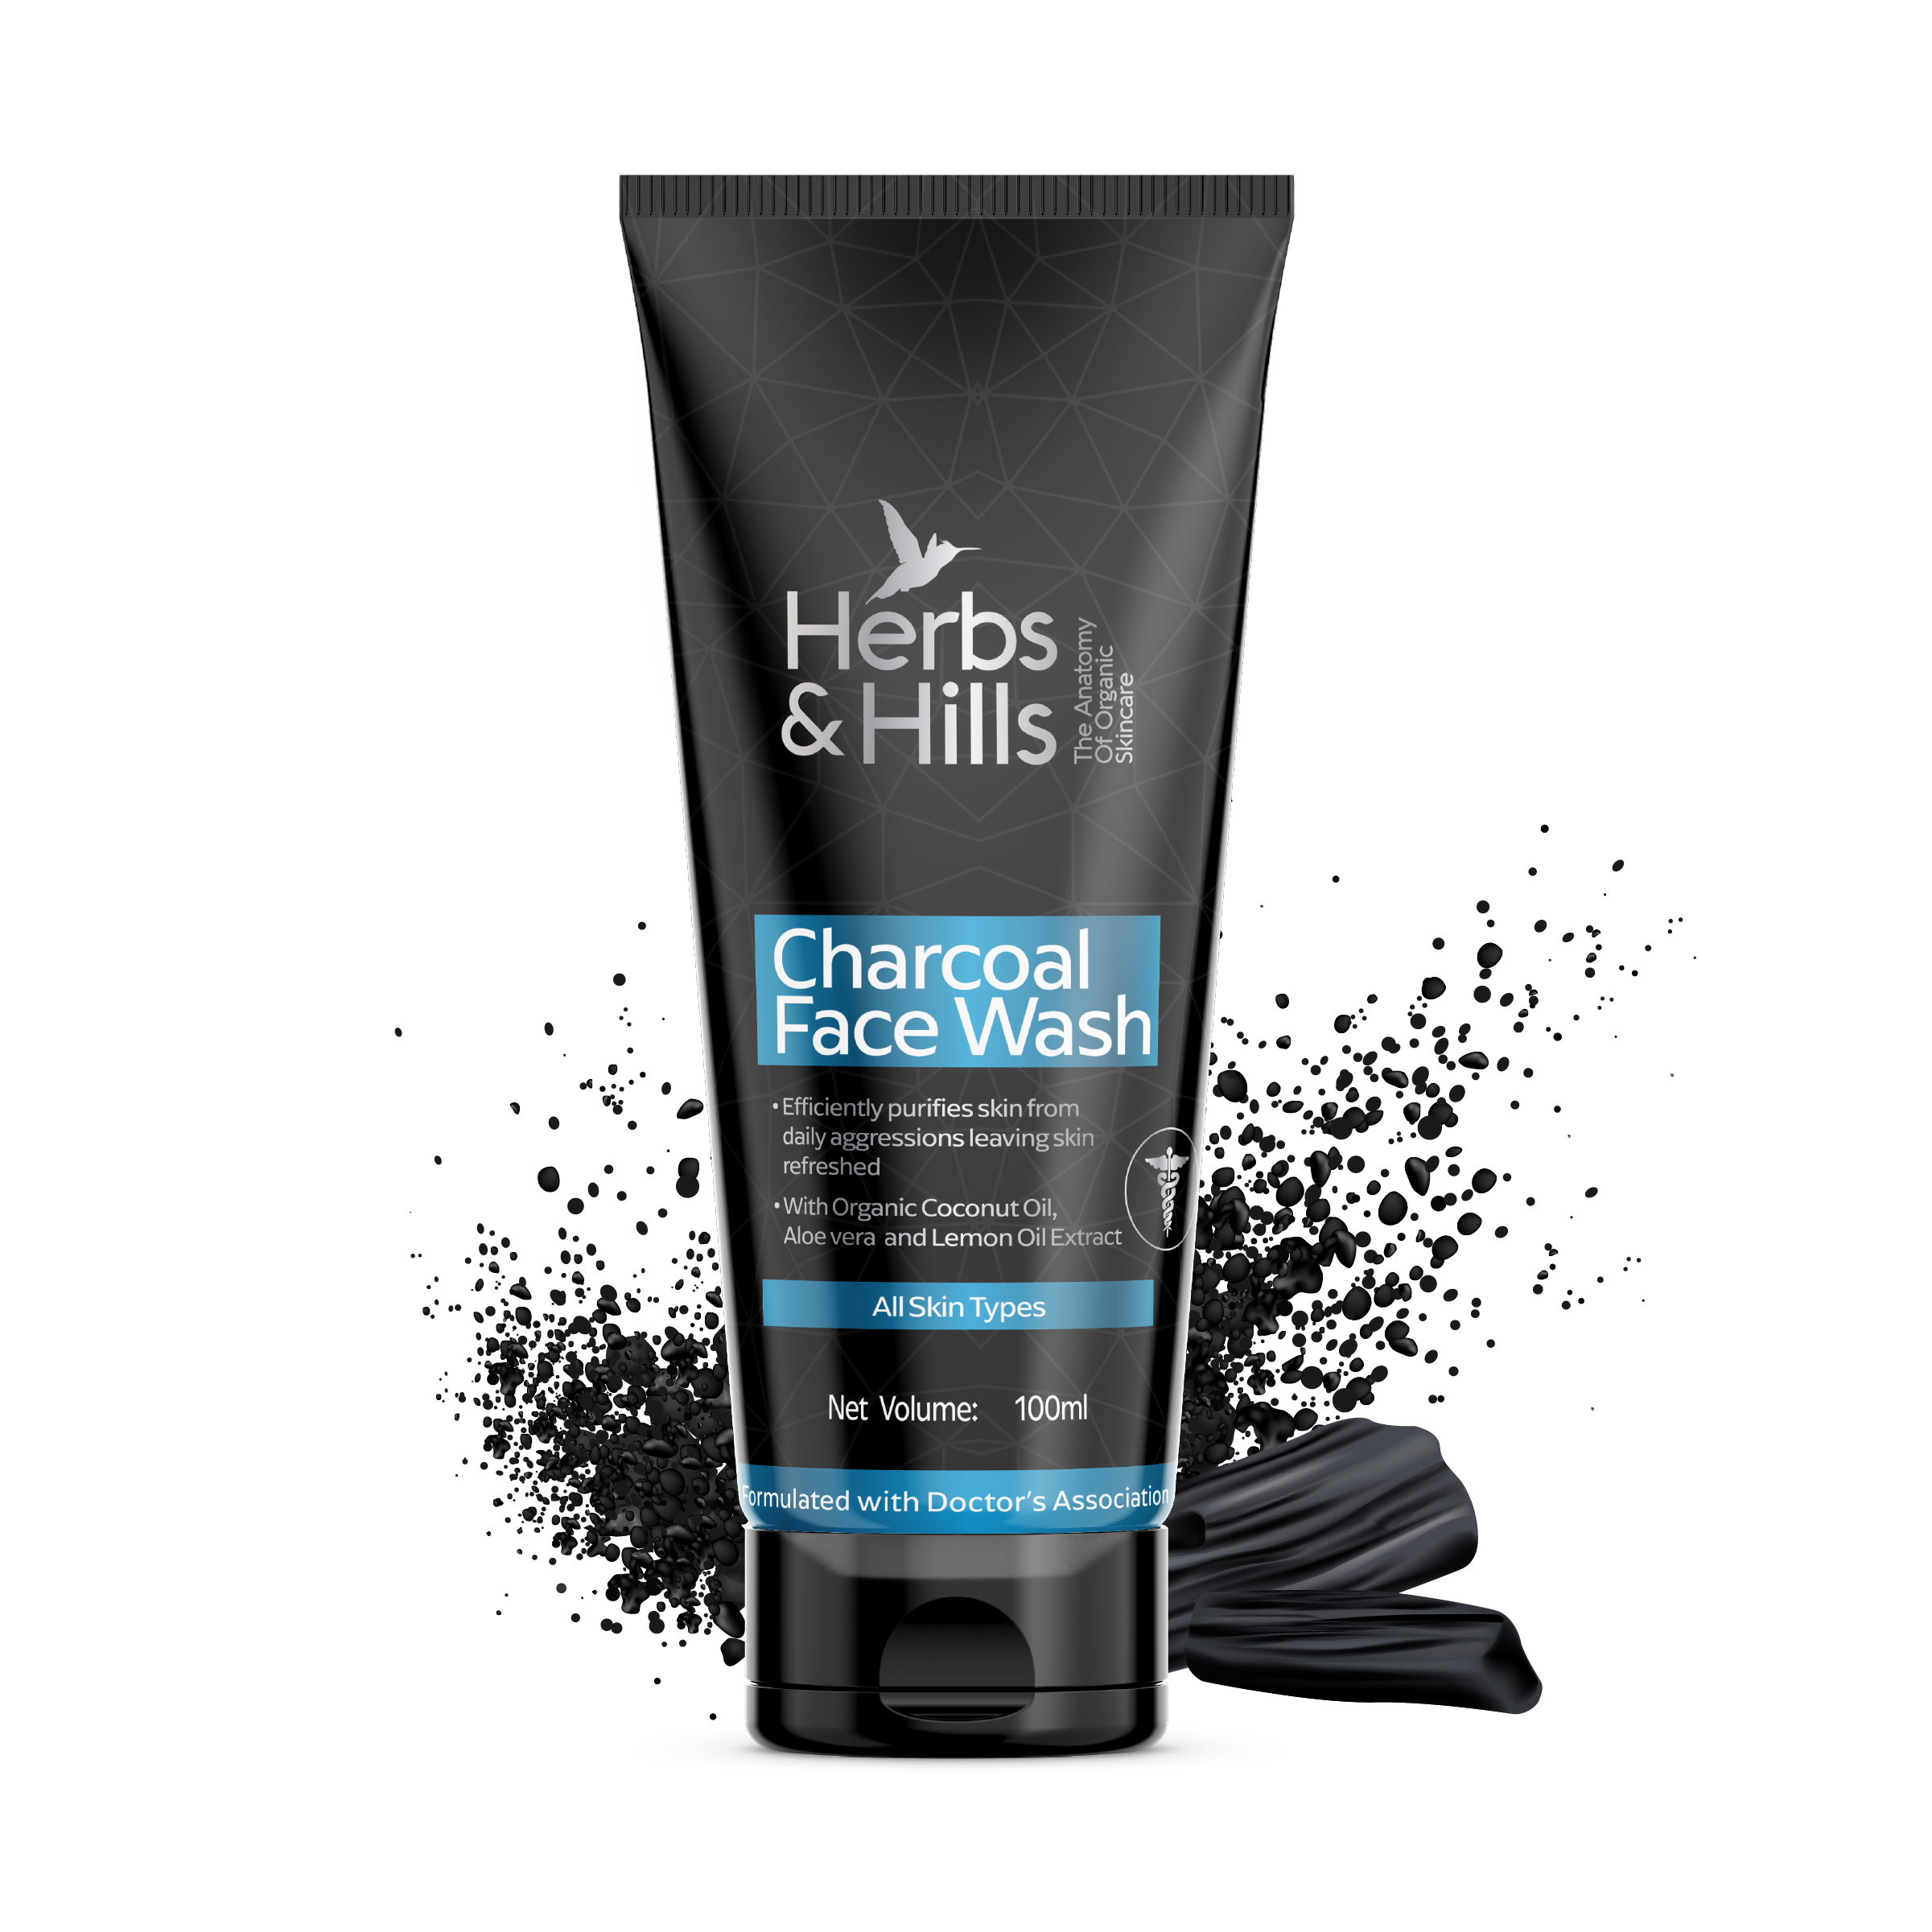 Charcoal Face Wash available in 50ml, 100ml